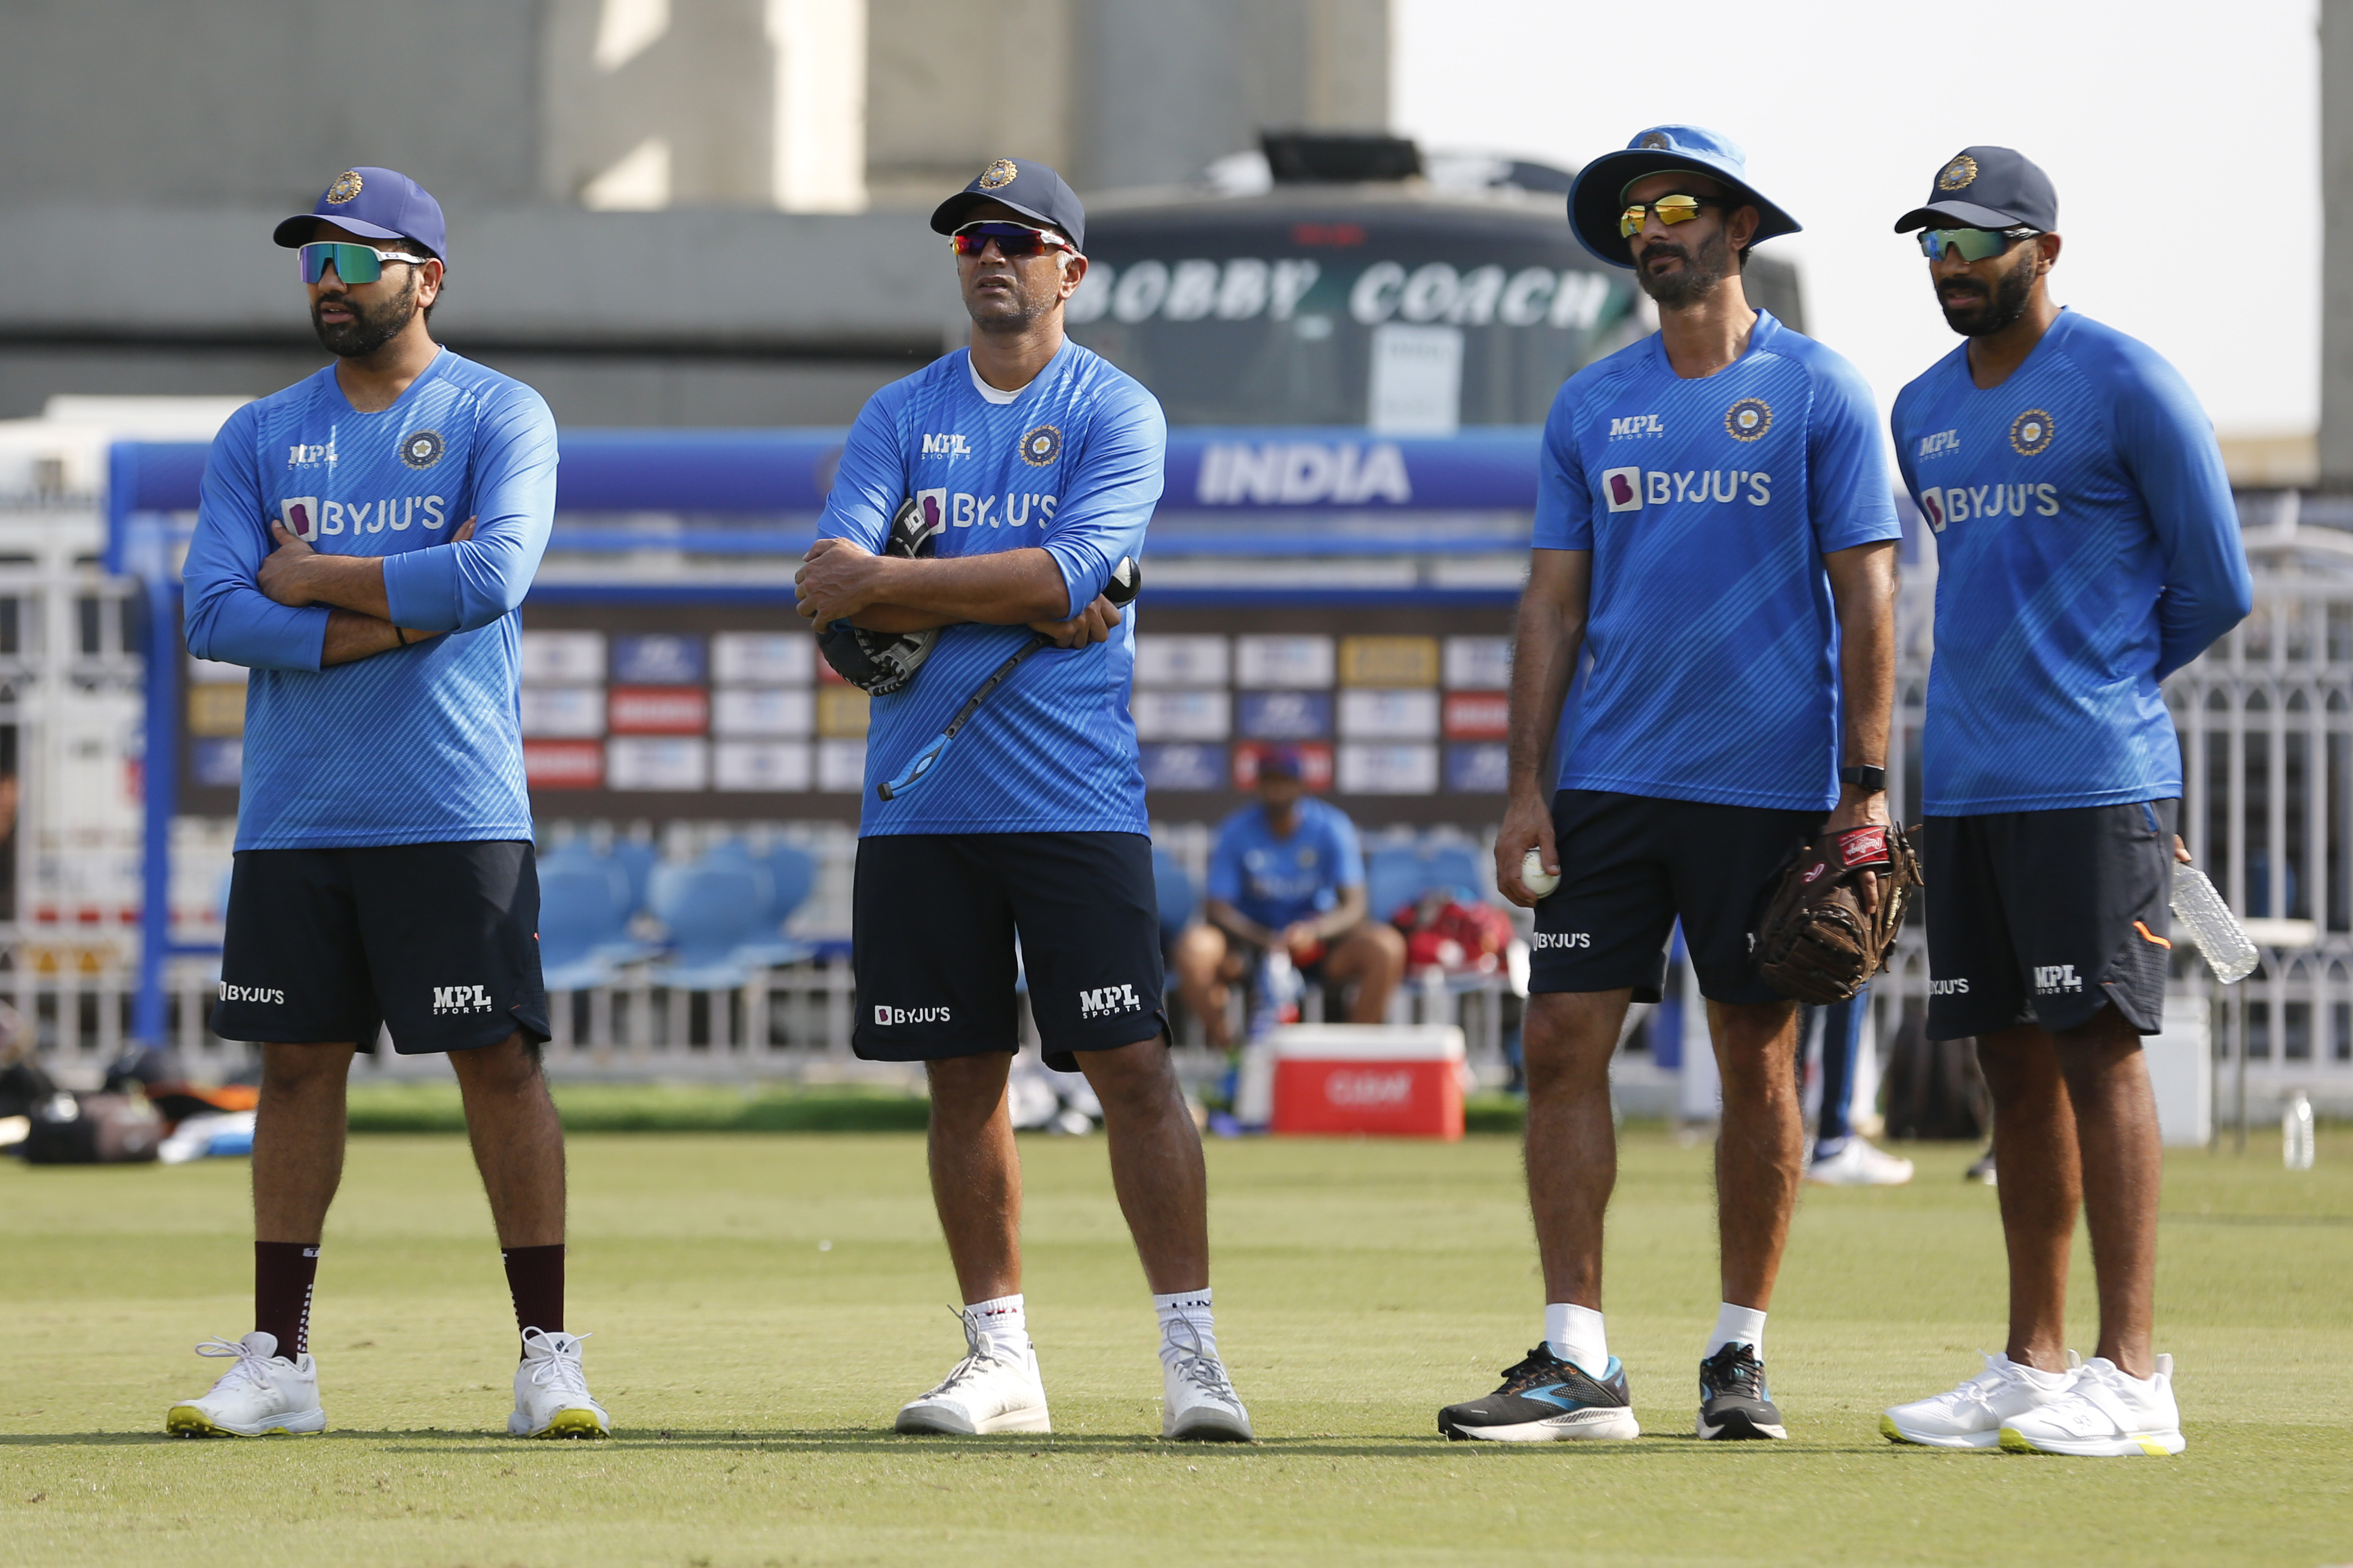 Bumrah with Dravid, Rohit and Rathour | BCCI